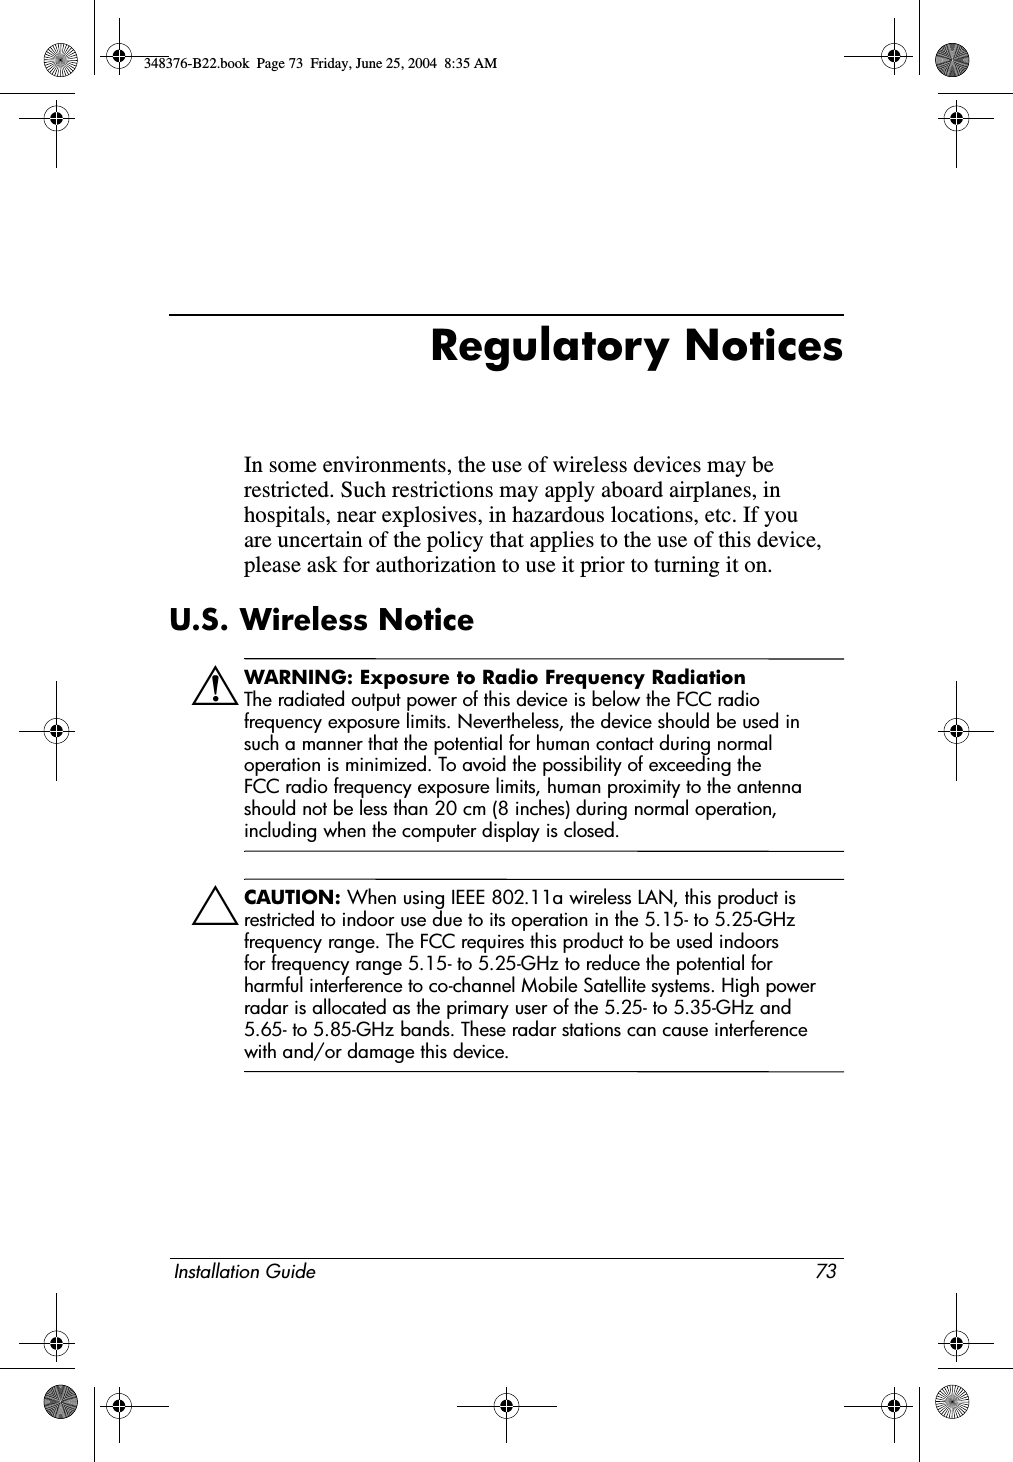 Installation Guide 73Regulatory NoticesIn some environments, the use of wireless devices may be restricted. Such restrictions may apply aboard airplanes, in hospitals, near explosives, in hazardous locations, etc. If you are uncertain of the policy that applies to the use of this device, please ask for authorization to use it prior to turning it on.U.S. Wireless NoticeÅWARNING: Exposure to Radio Frequency RadiationThe radiated output power of this device is below the FCC radio frequency exposure limits. Nevertheless, the device should be used in such a manner that the potential for human contact during normal operation is minimized. To avoid the possibility of exceeding the FCC radio frequency exposure limits, human proximity to the antenna should not be less than 20 cm (8 inches) during normal operation, including when the computer display is closed.ÄCAUTION: When using IEEE 802.11a wireless LAN, this product is restricted to indoor use due to its operation in the 5.15- to 5.25-GHz frequency range. The FCC requires this product to be used indoors for frequency range 5.15- to 5.25-GHz to reduce the potential for harmful interference to co-channel Mobile Satellite systems. High power radar is allocated as the primary user of the 5.25- to 5.35-GHz and 5.65- to 5.85-GHz bands. These radar stations can cause interference with and/or damage this device.348376-B22.book  Page 73  Friday, June 25, 2004  8:35 AM